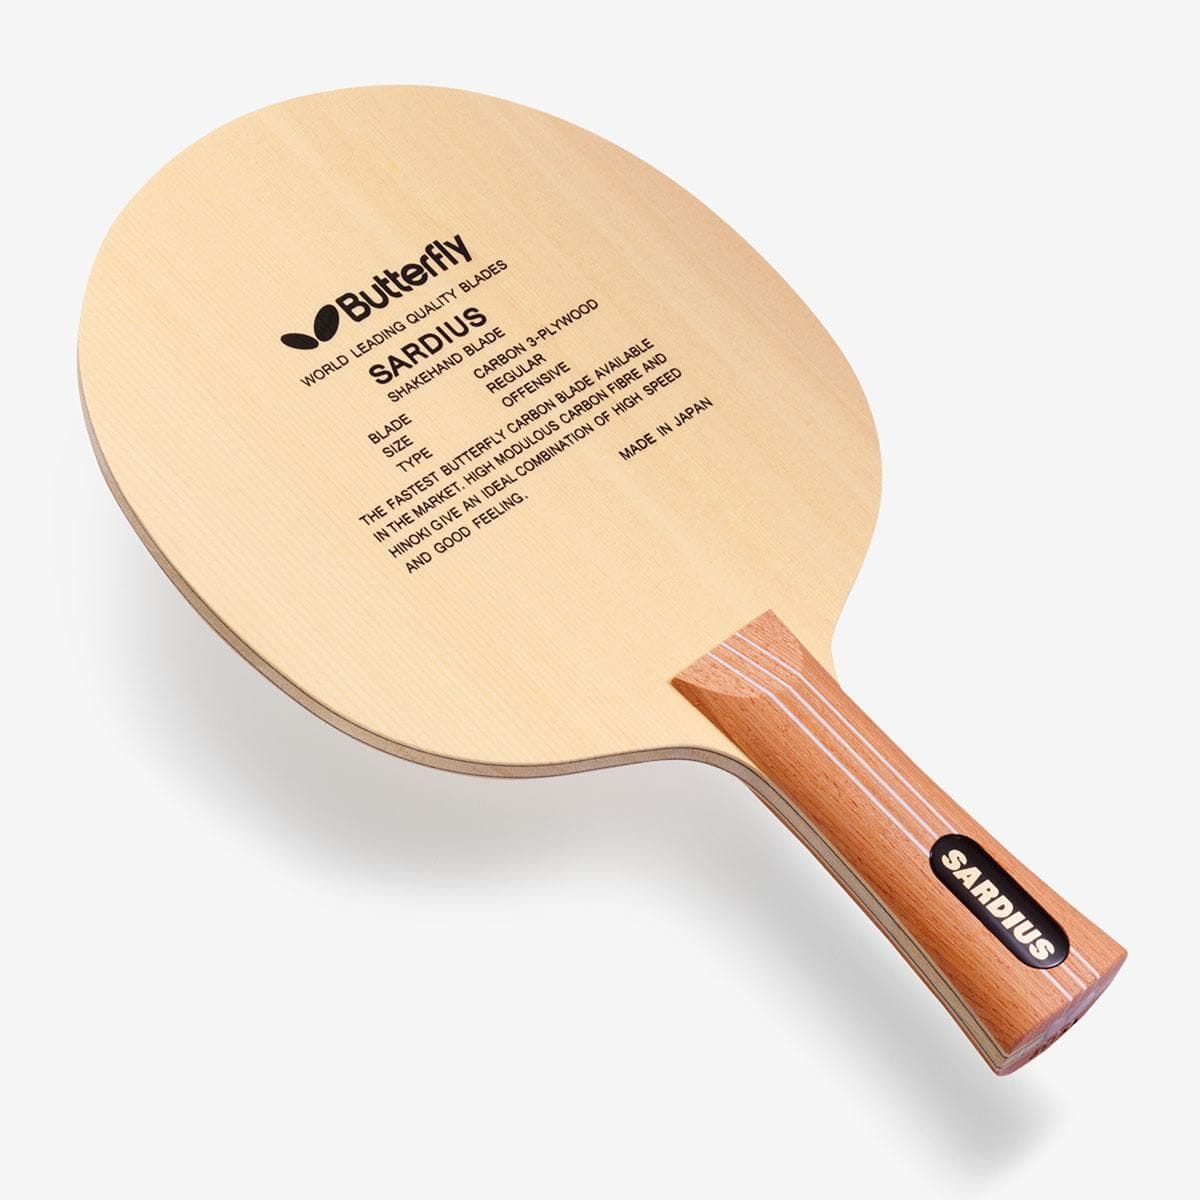 Butterfly Online: Table Tennis Equipment & Table Tennis News